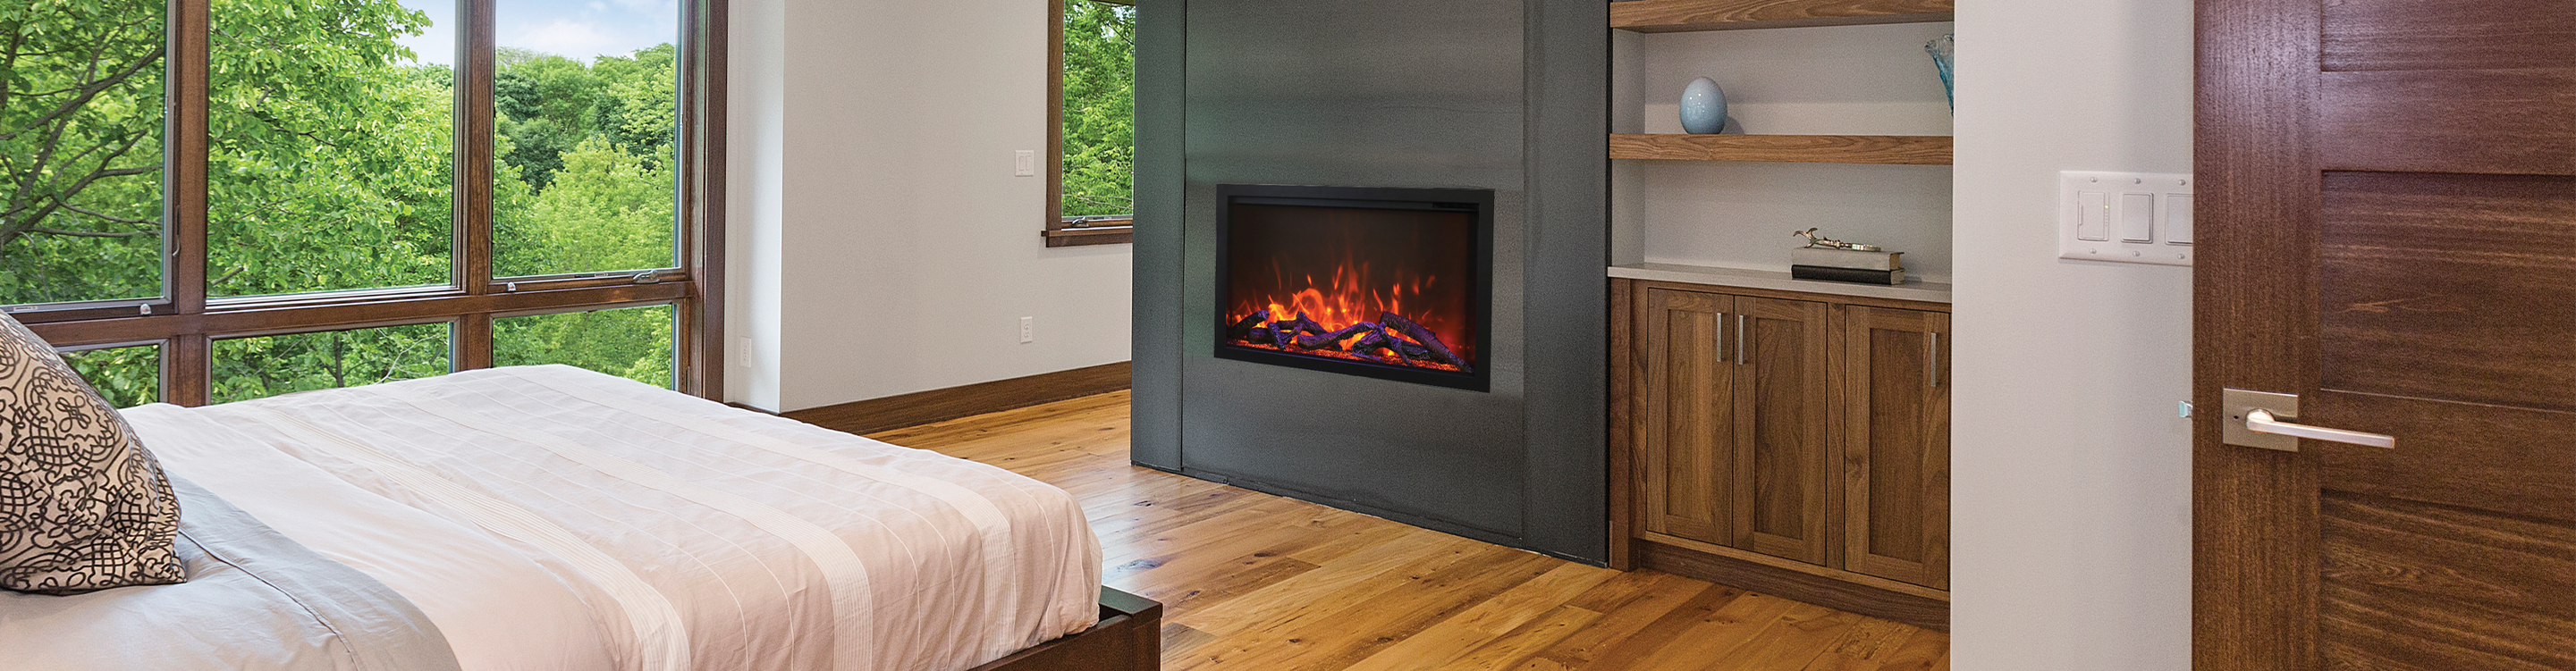 Modern electric fireplace in a bedroom.